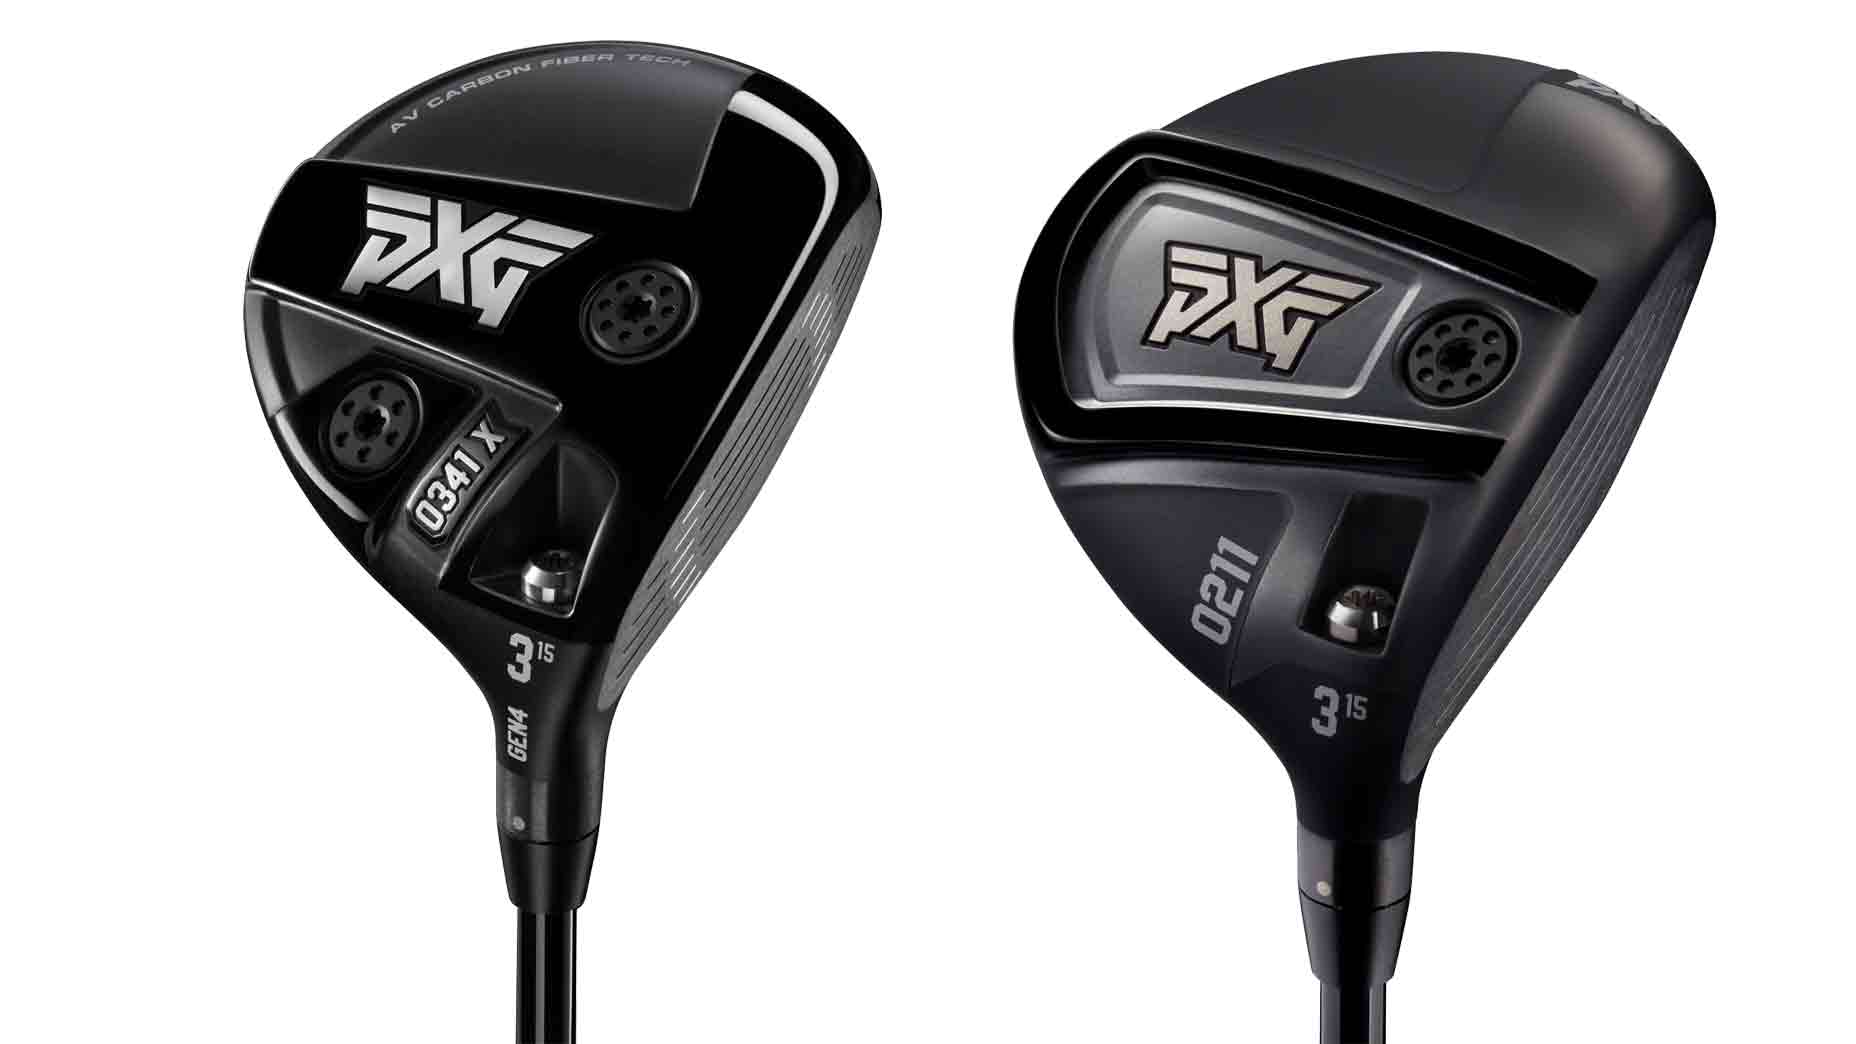 4 PXG fairway woods tested and reviewed: ClubTest 2022